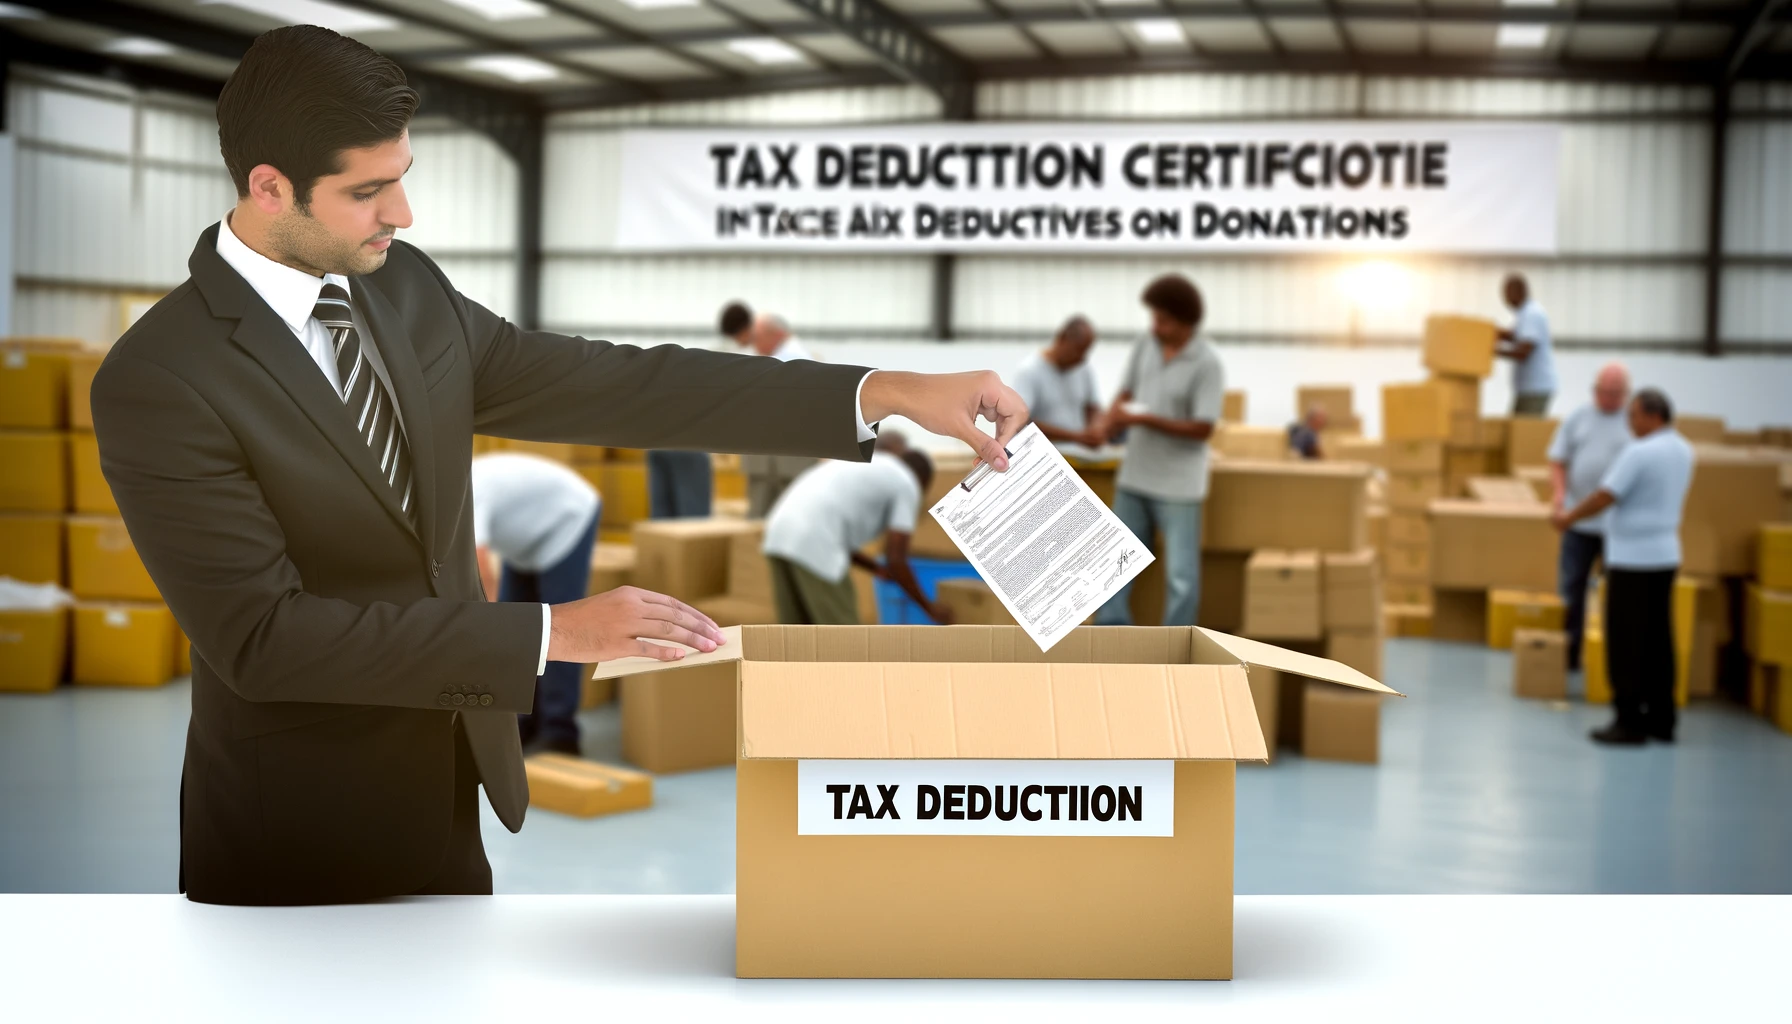 This article aims to demystify the tax implications of charitable contributions, helping you understand Tax Deductions for Charitable Donations